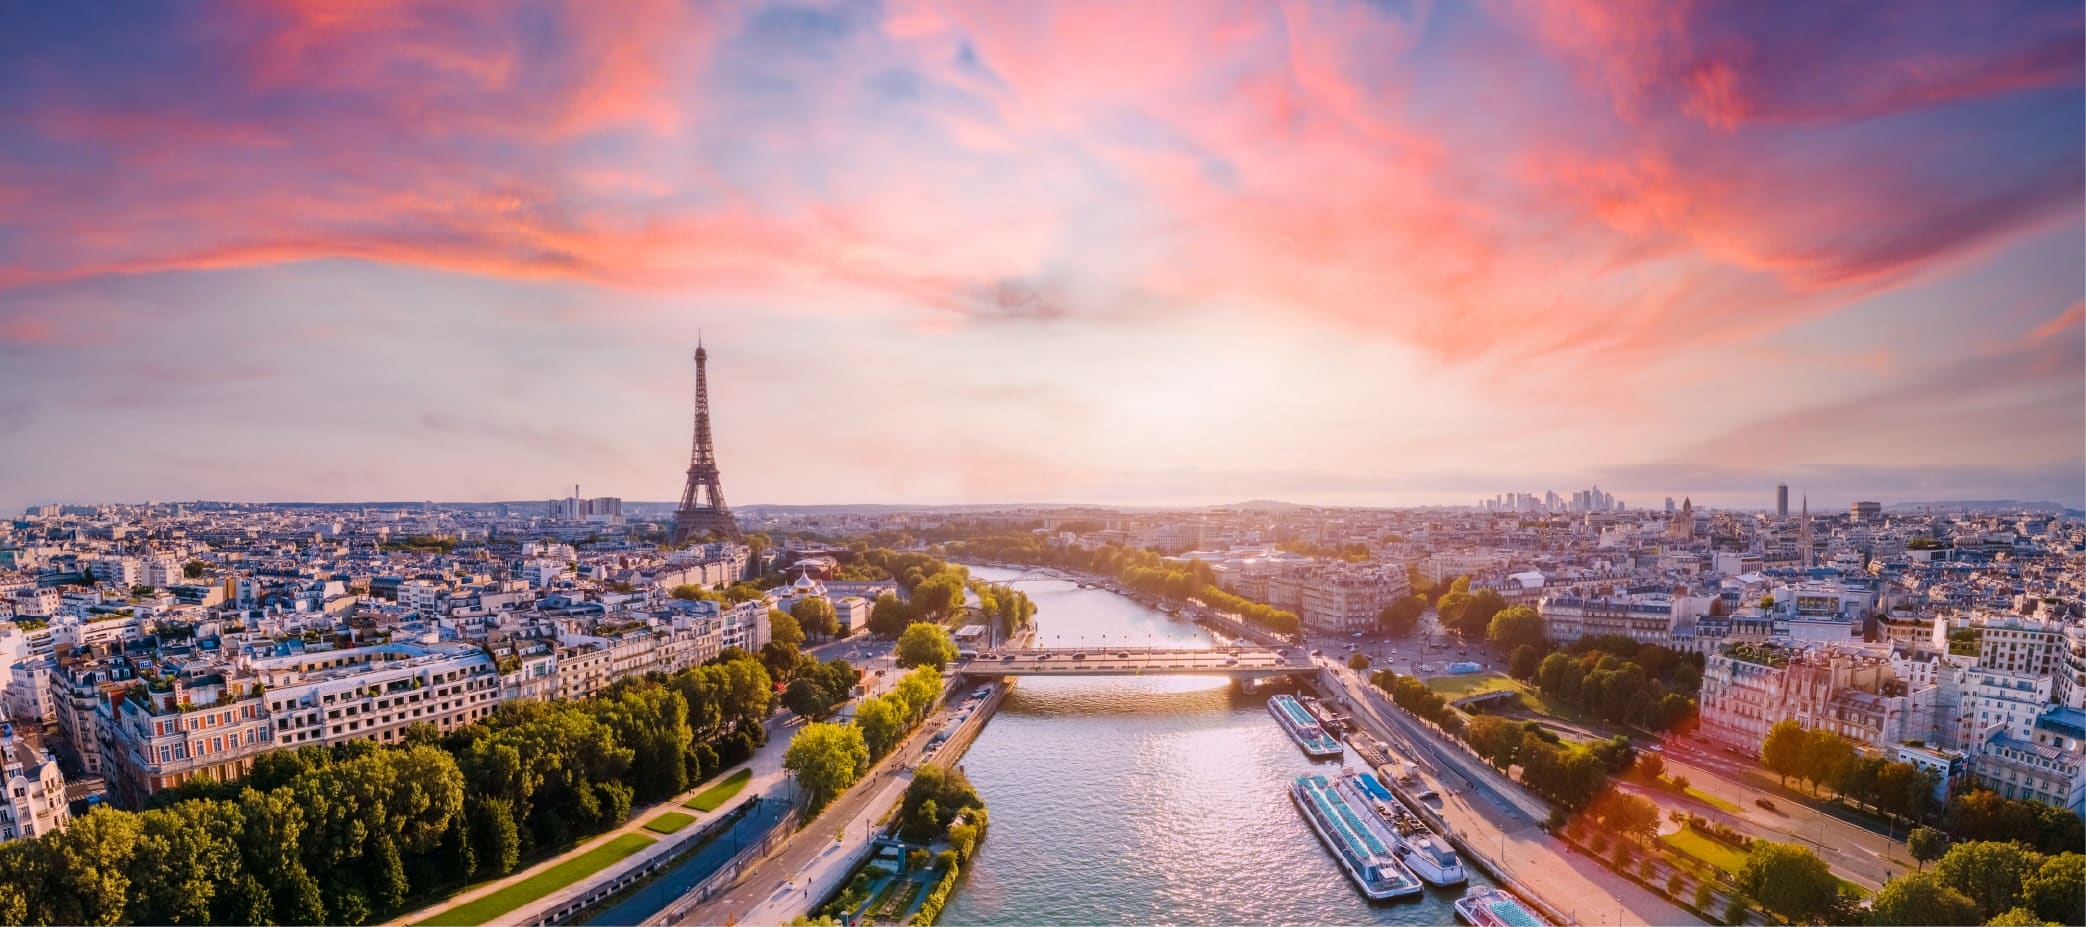 paris tickets tours and attractions | Paris Whatsup